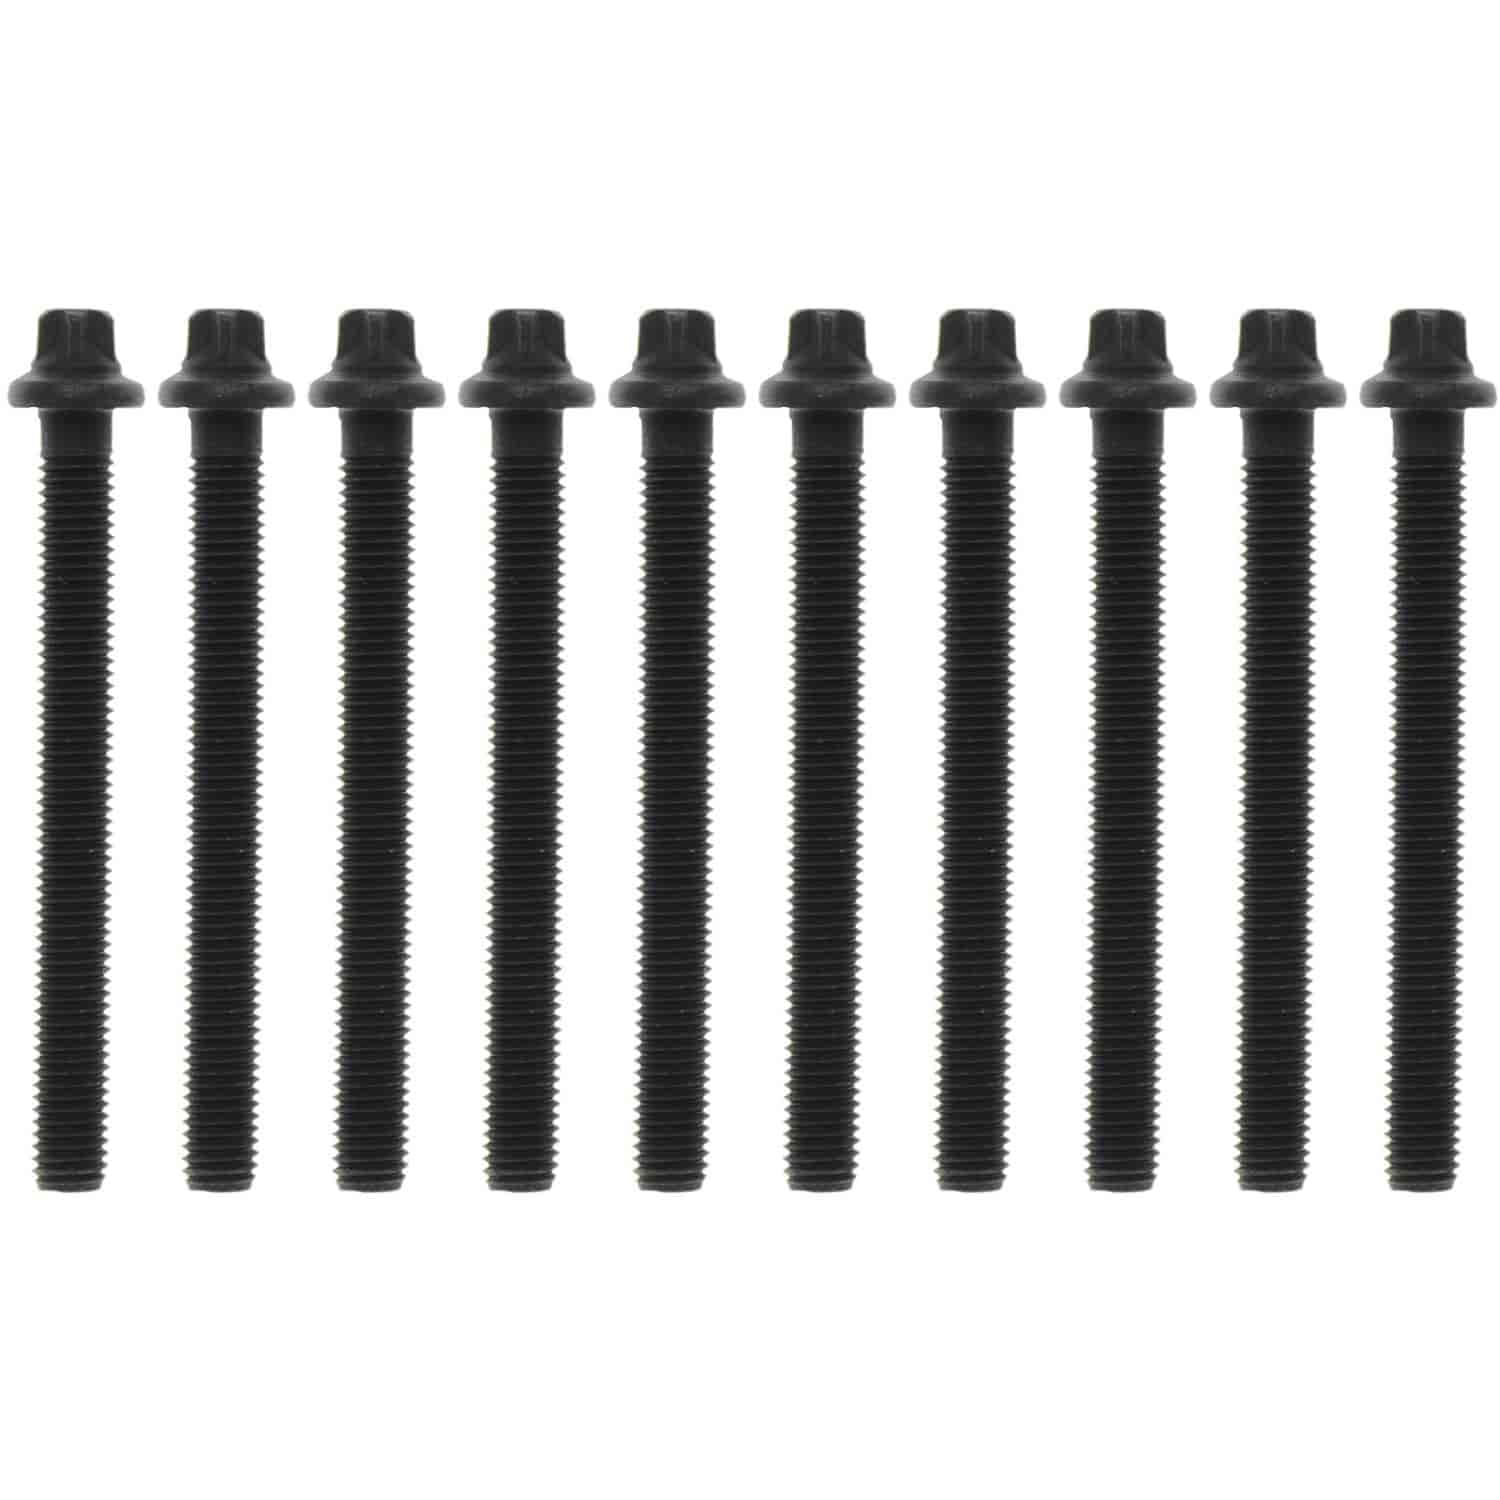 Cylinder Head Bolts BMW 1.8l and 1.9l 1991-1999 M10 Outer Torx